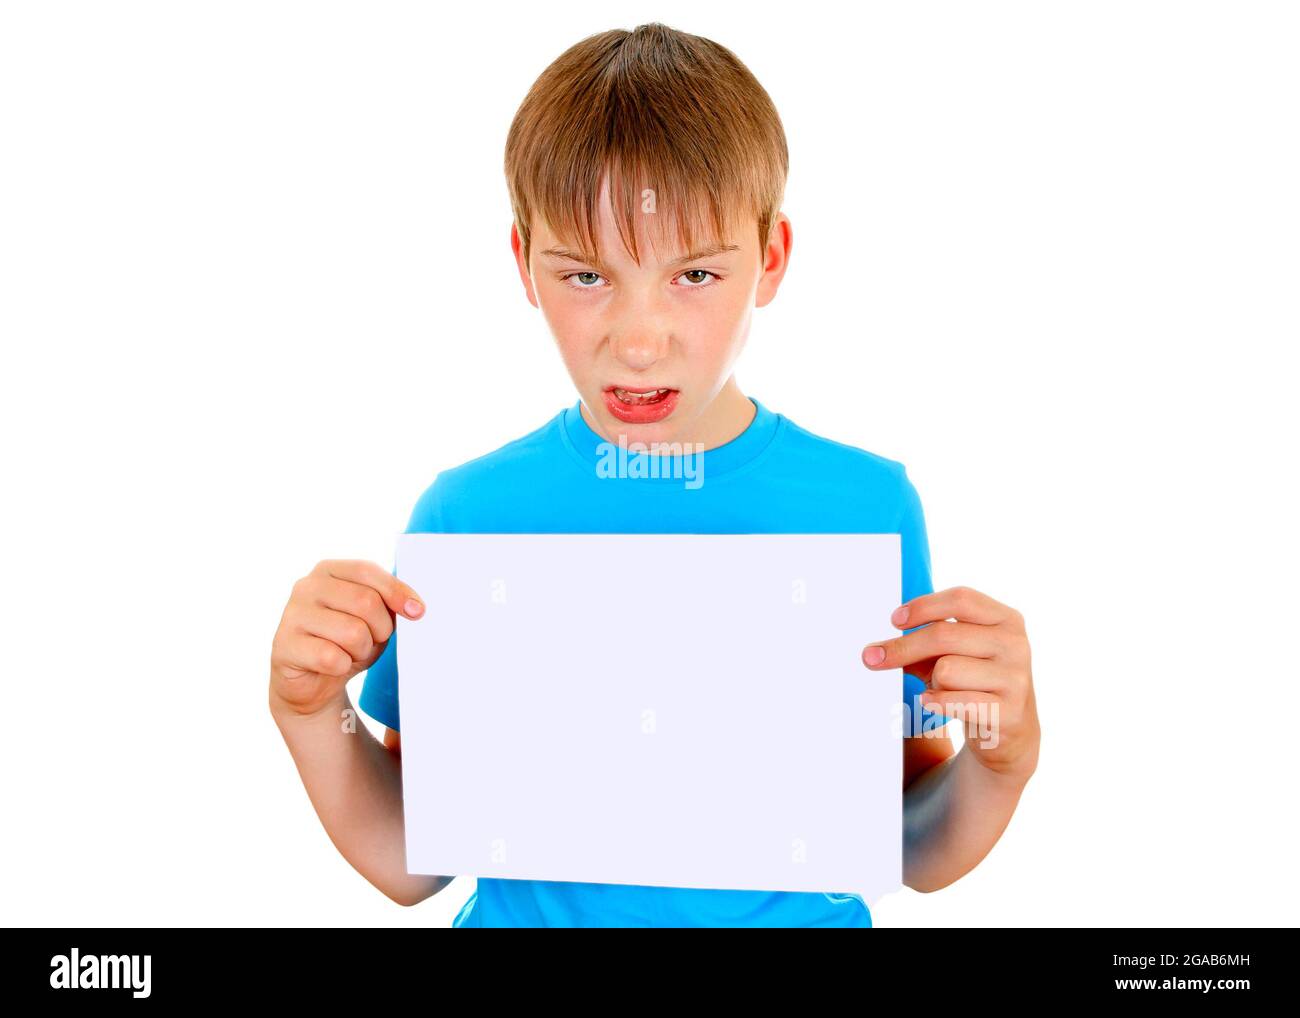 Angry Kid hold the Blank Paper on the White Background Stock Photo